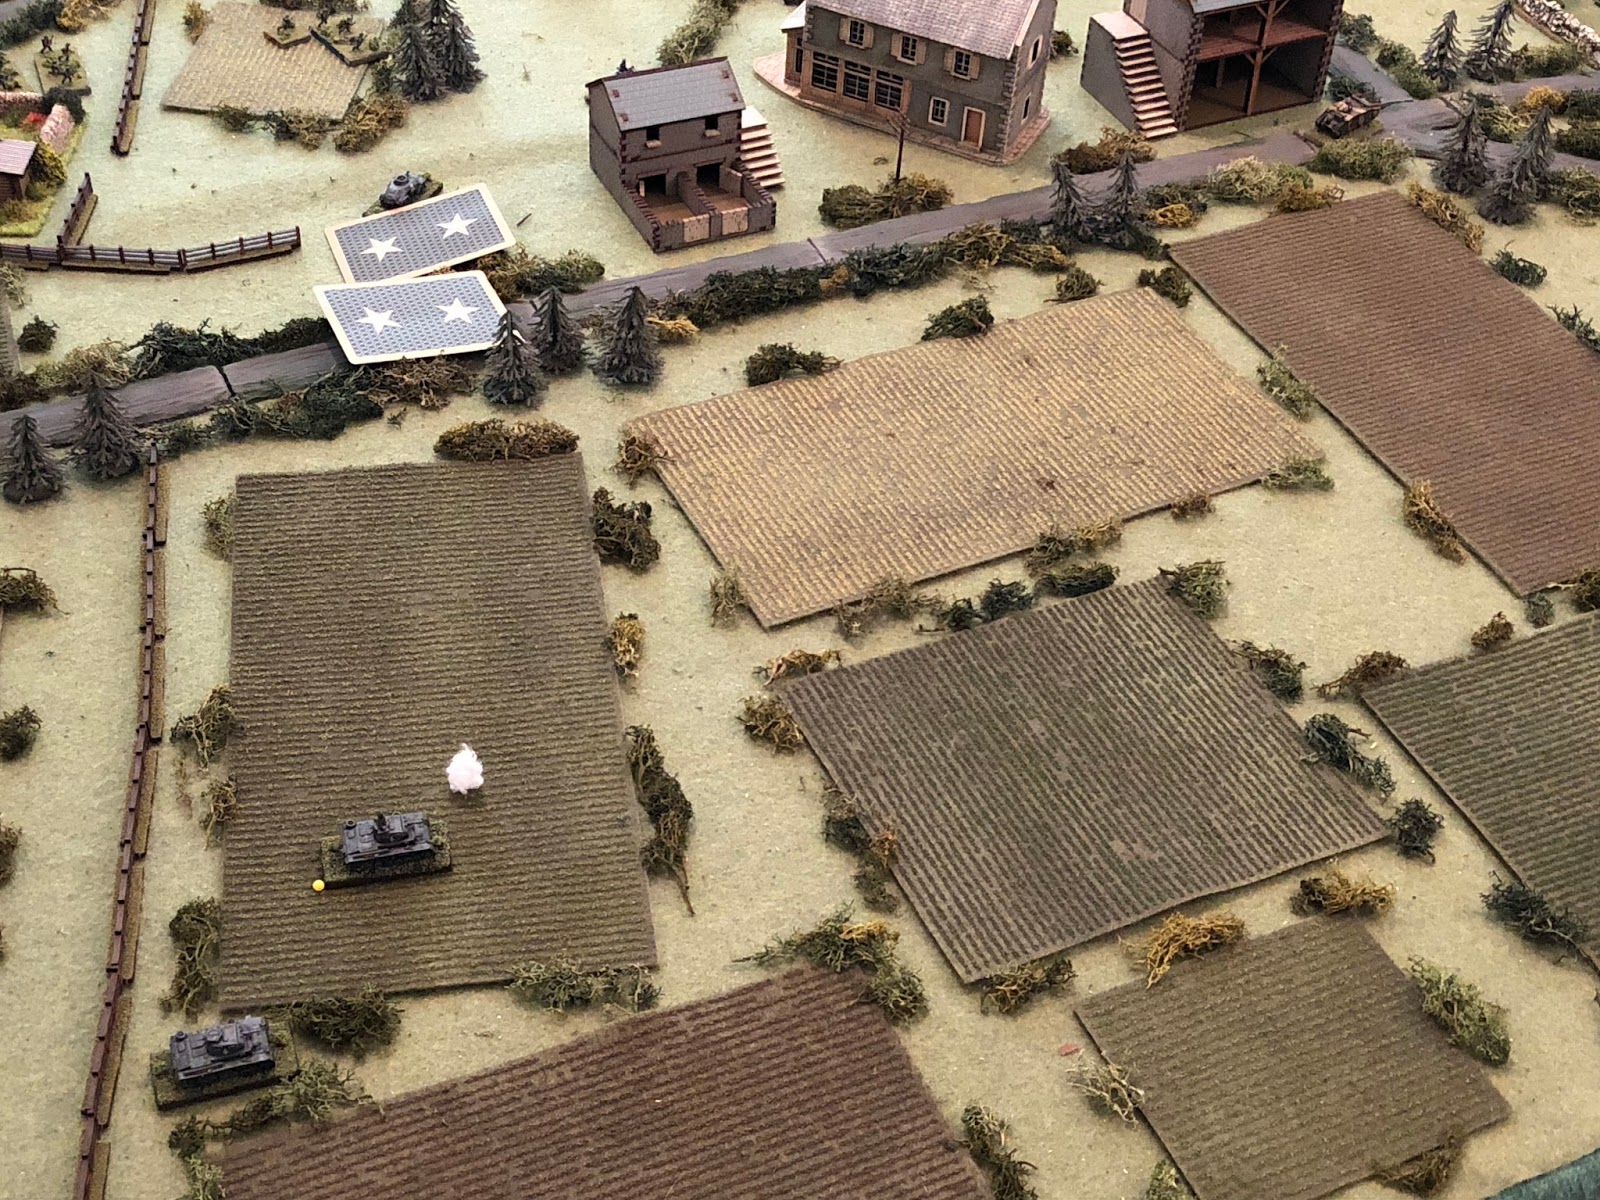  Back in the north, Lt Loeb and Sgt Mayer (bottom left) are still facing off against the damn Char B (top right) and wondering when SSgt Mangold is going to get his Pz IVs (on Blind at top centre left) into the fight!   